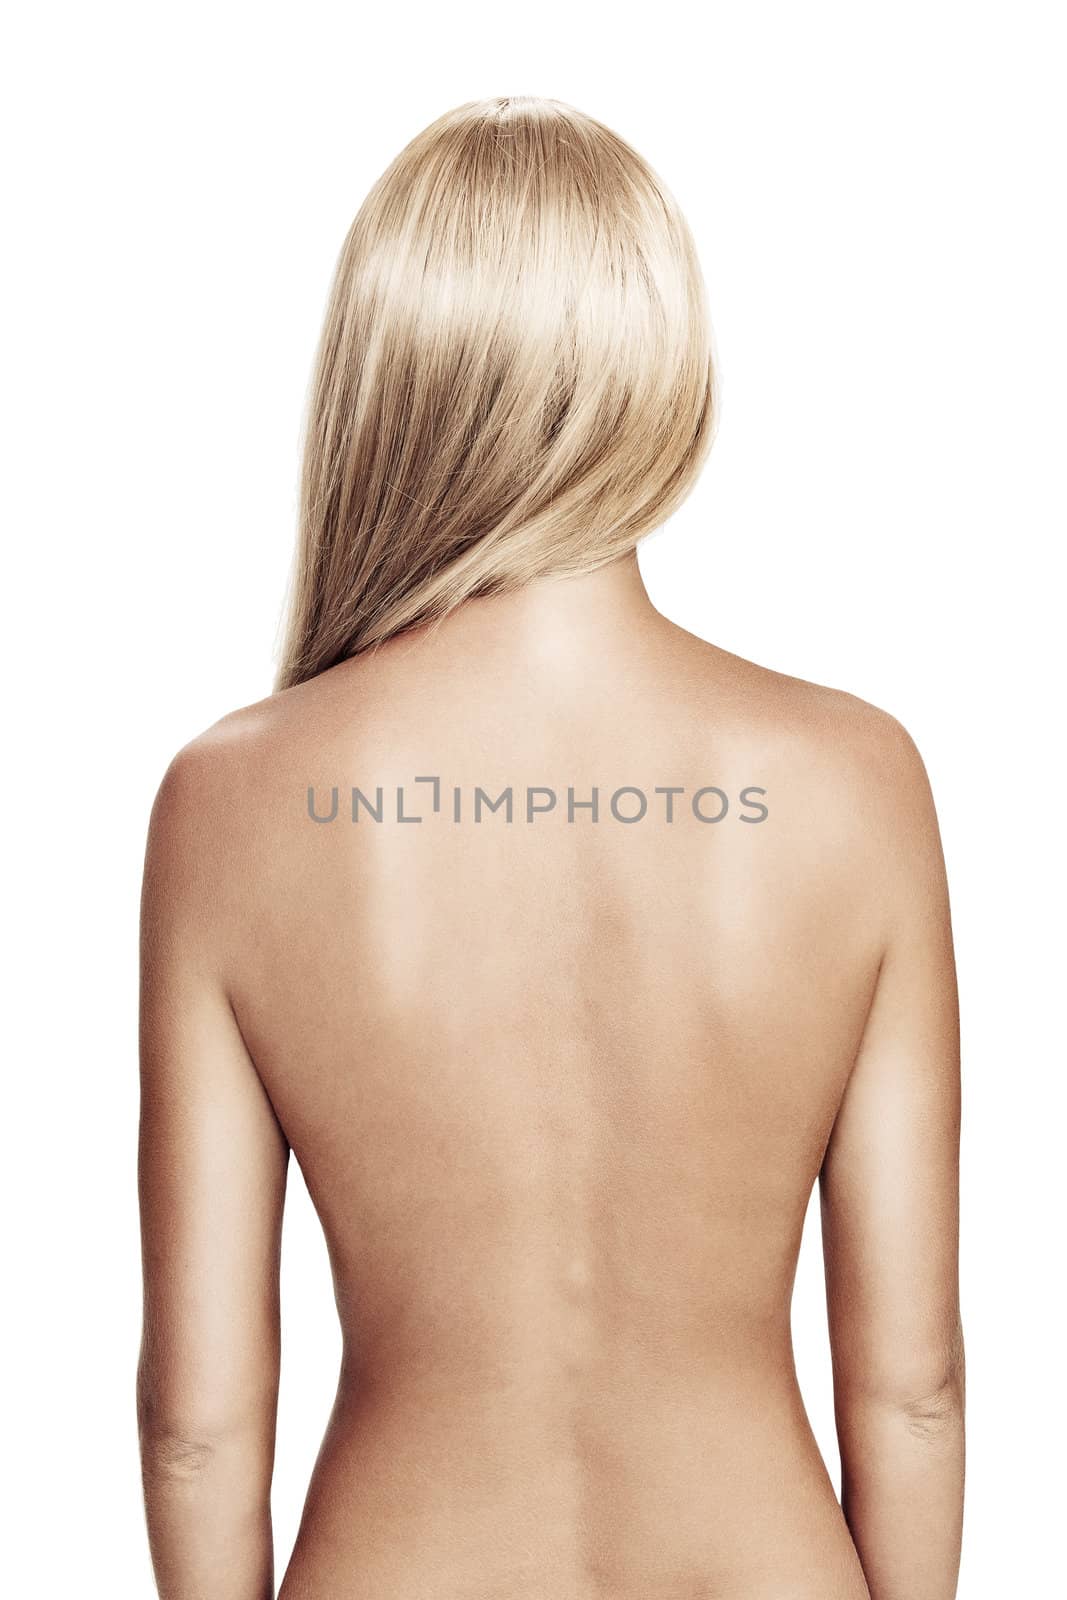 View of nice young wonam back on white back